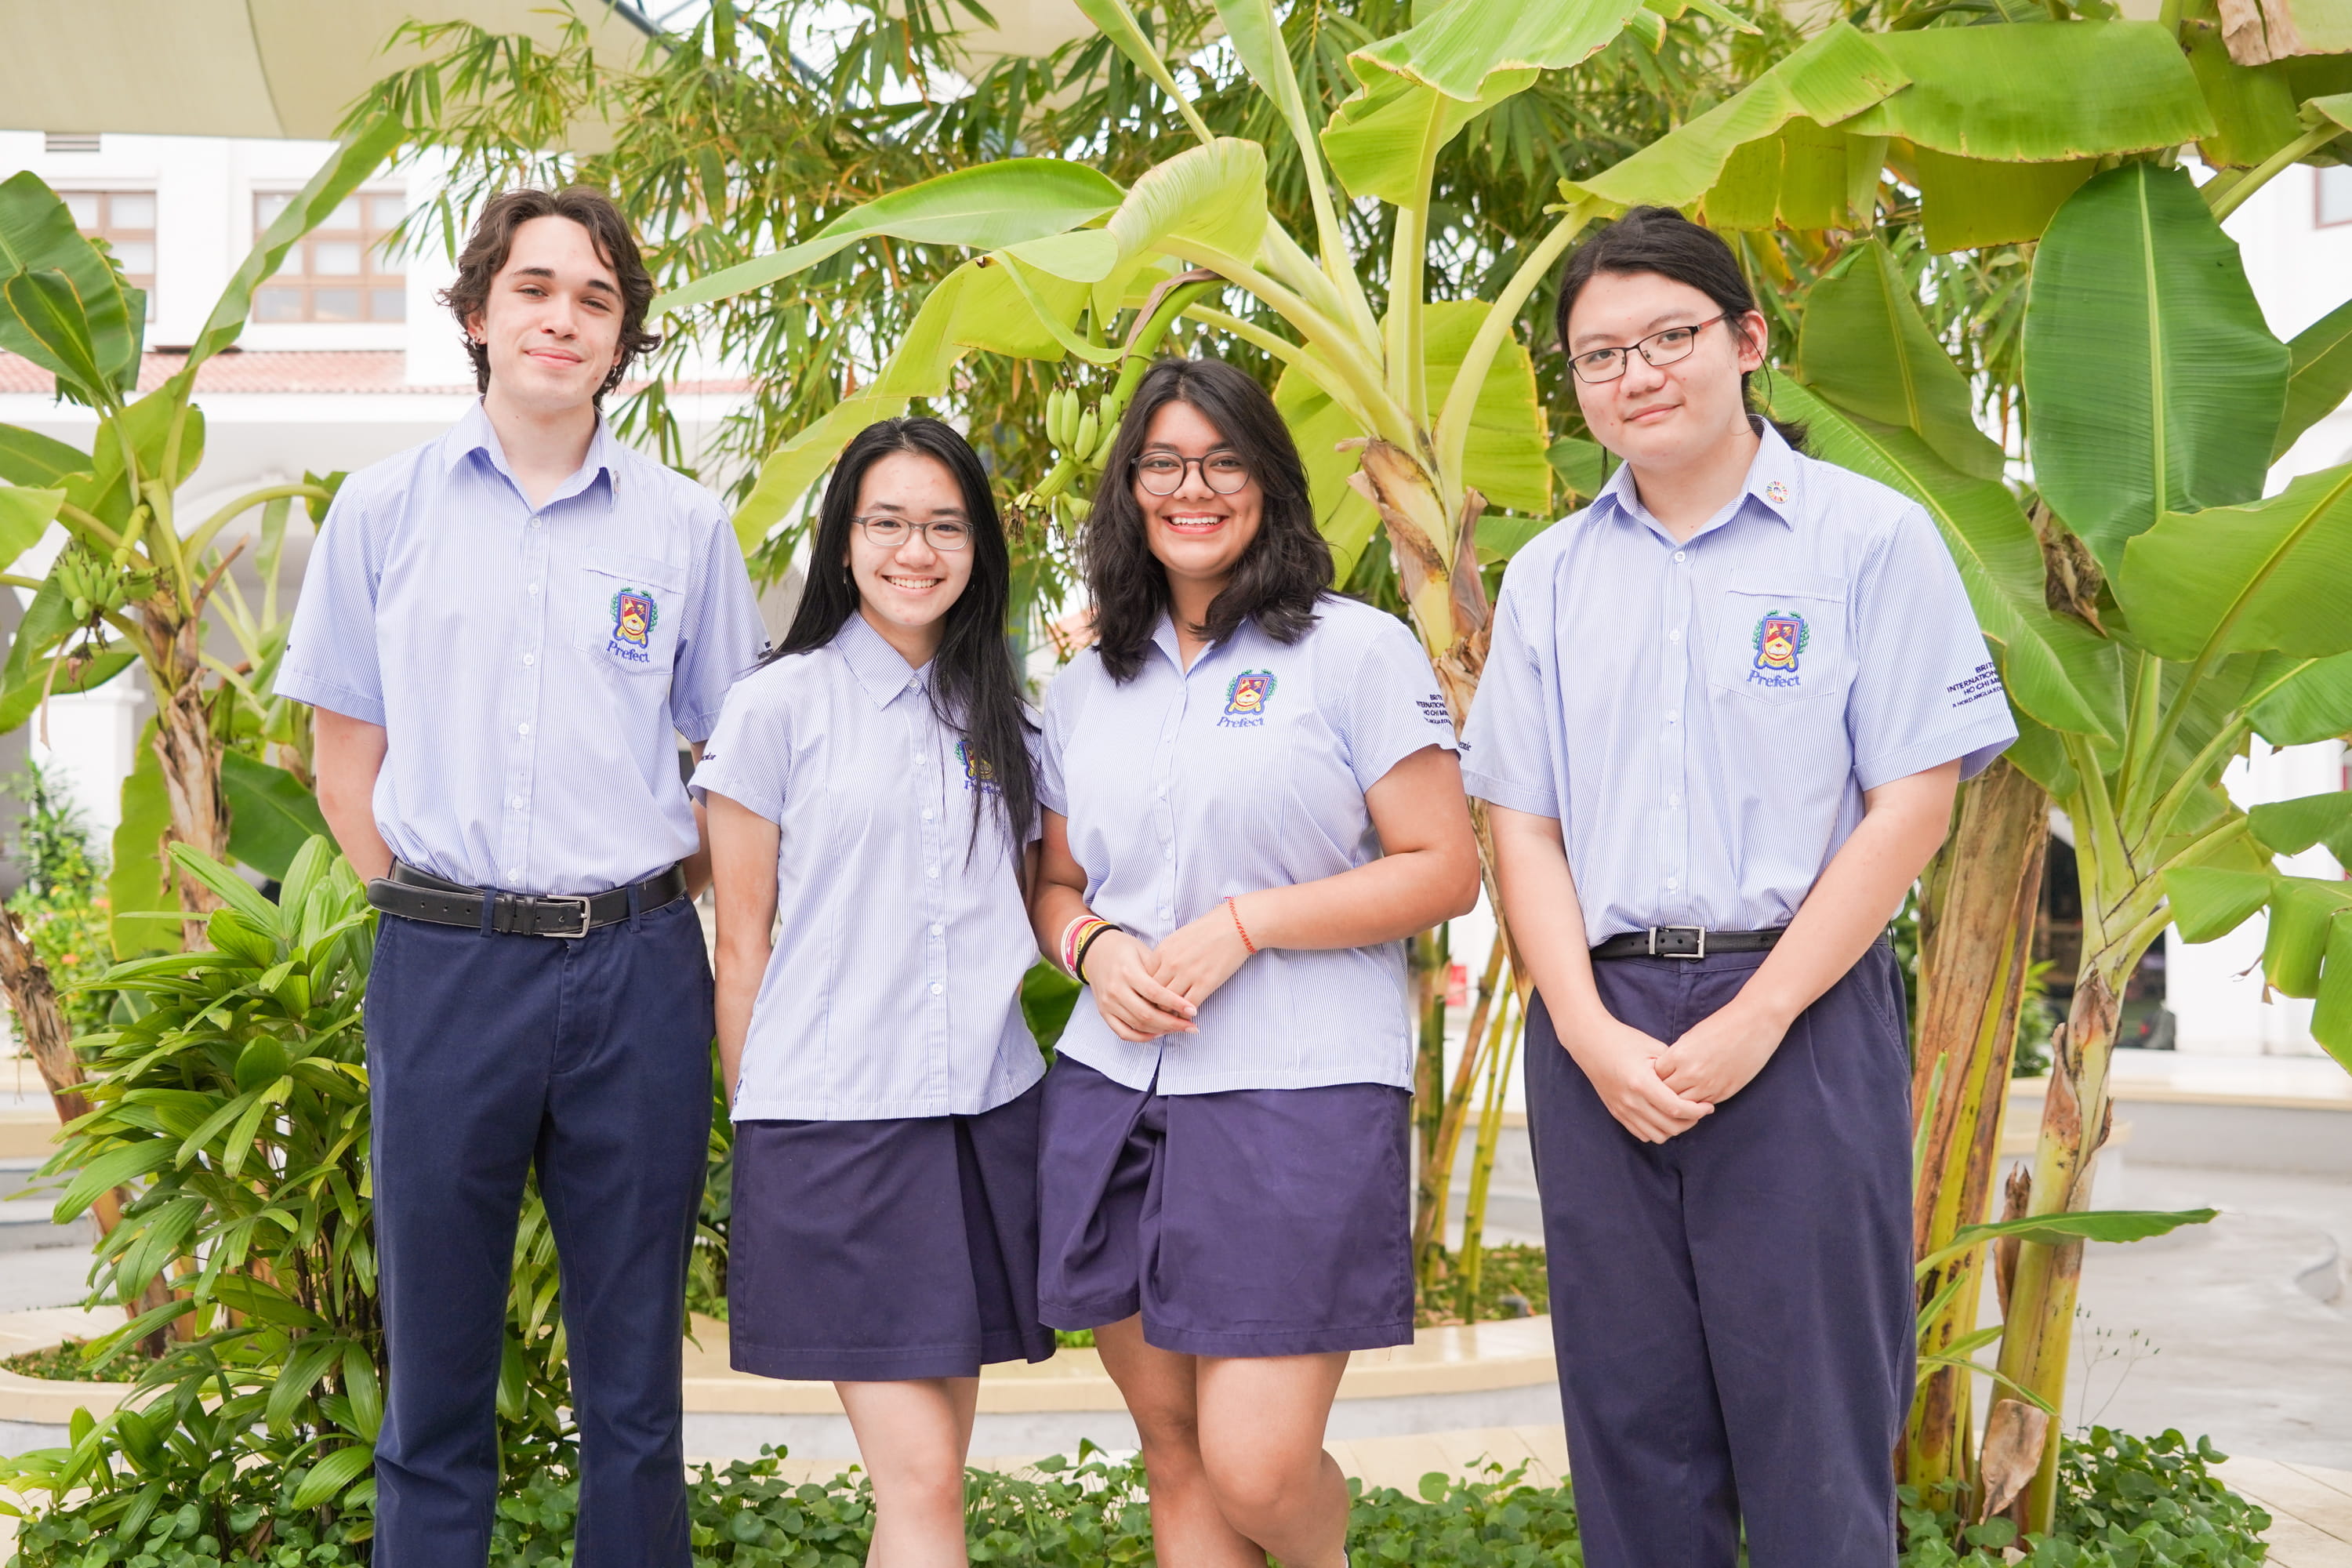 Meet Our New Head Students - Meet Our New Head Students